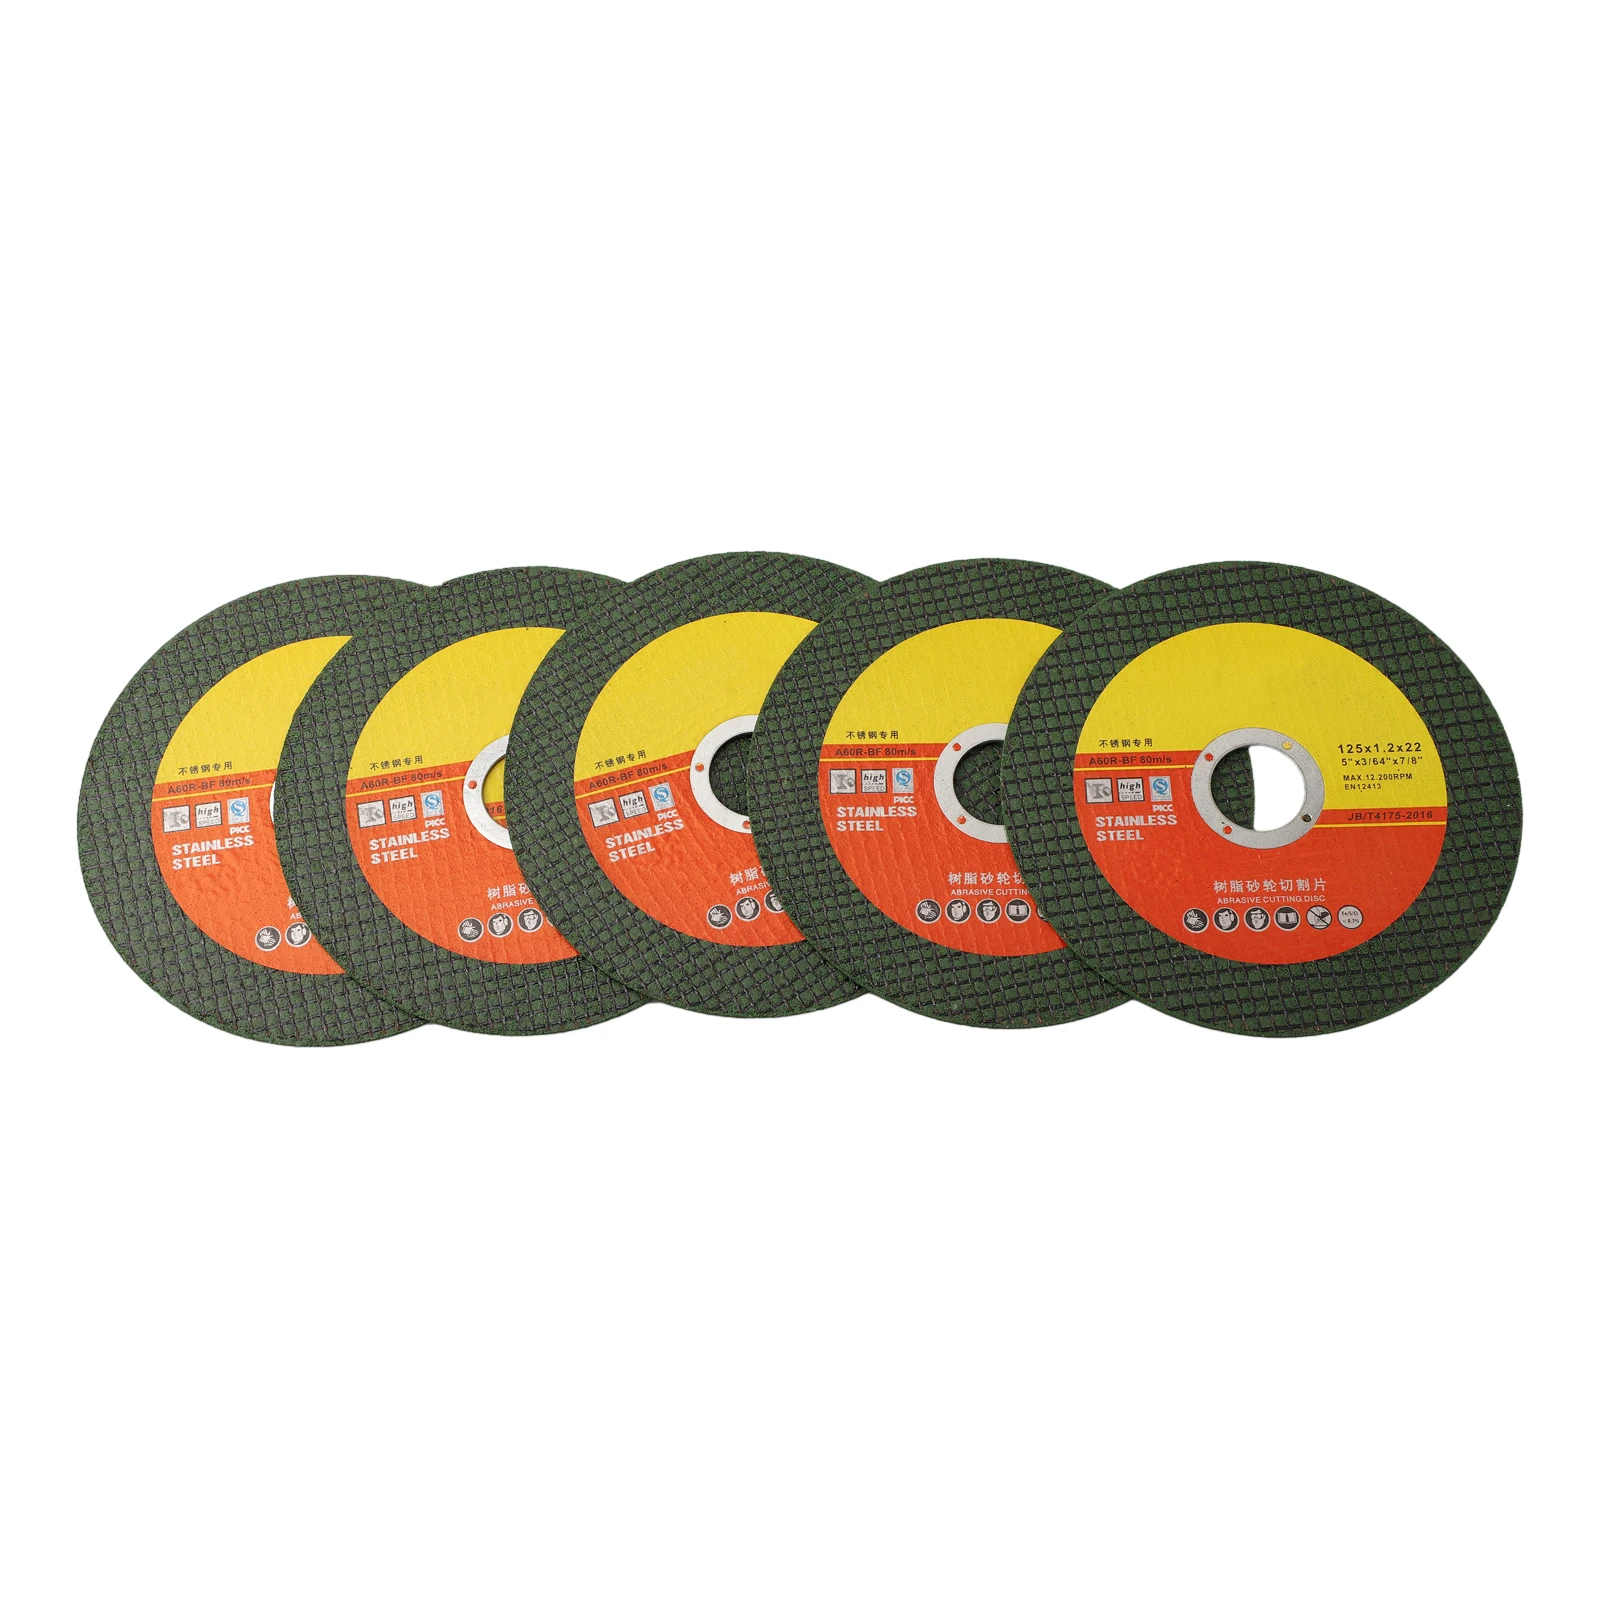 5pcs 125mm/ 5 Inch Cutting Disc Angle Grinder Stainless Steel Grinding Resin Double Mesh For Grinding Stone Meta Land Polishing